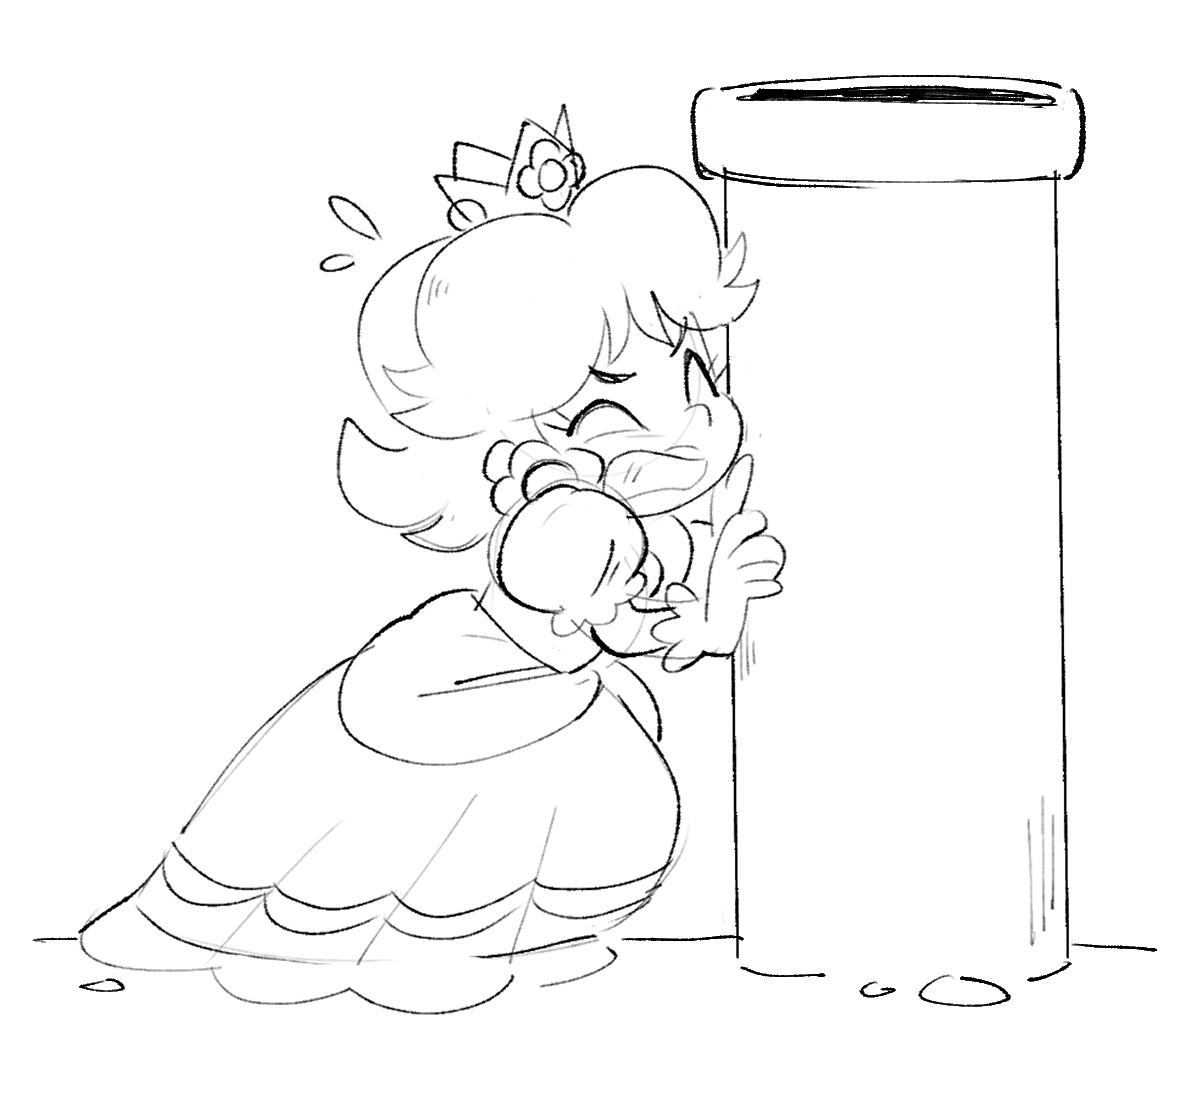 i'm literally never going to shut up about daisy being in smb wonder aaughguuagh some warm up doodles 🌼